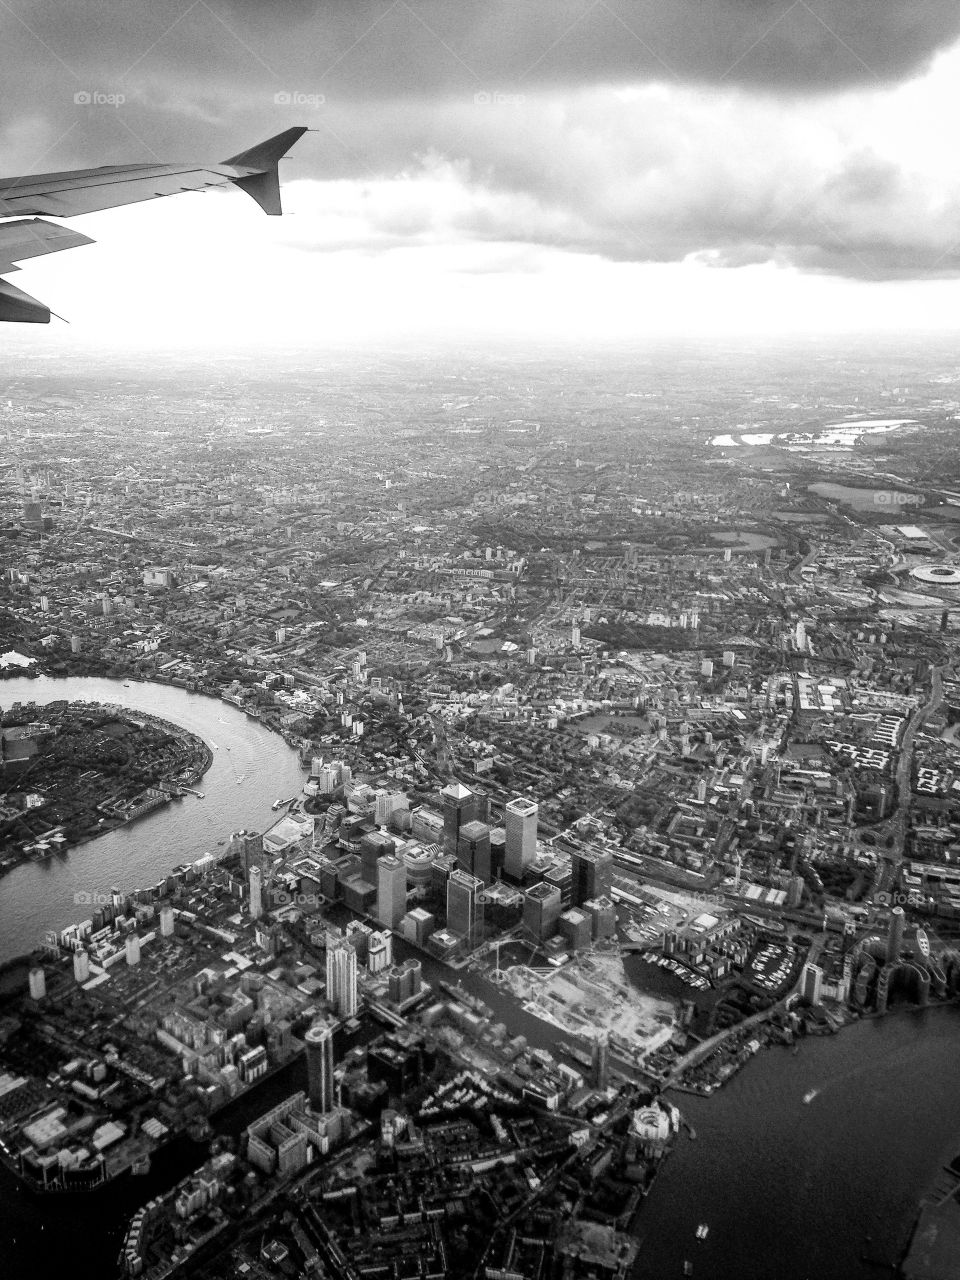 Flying over Canary Wharf in London.